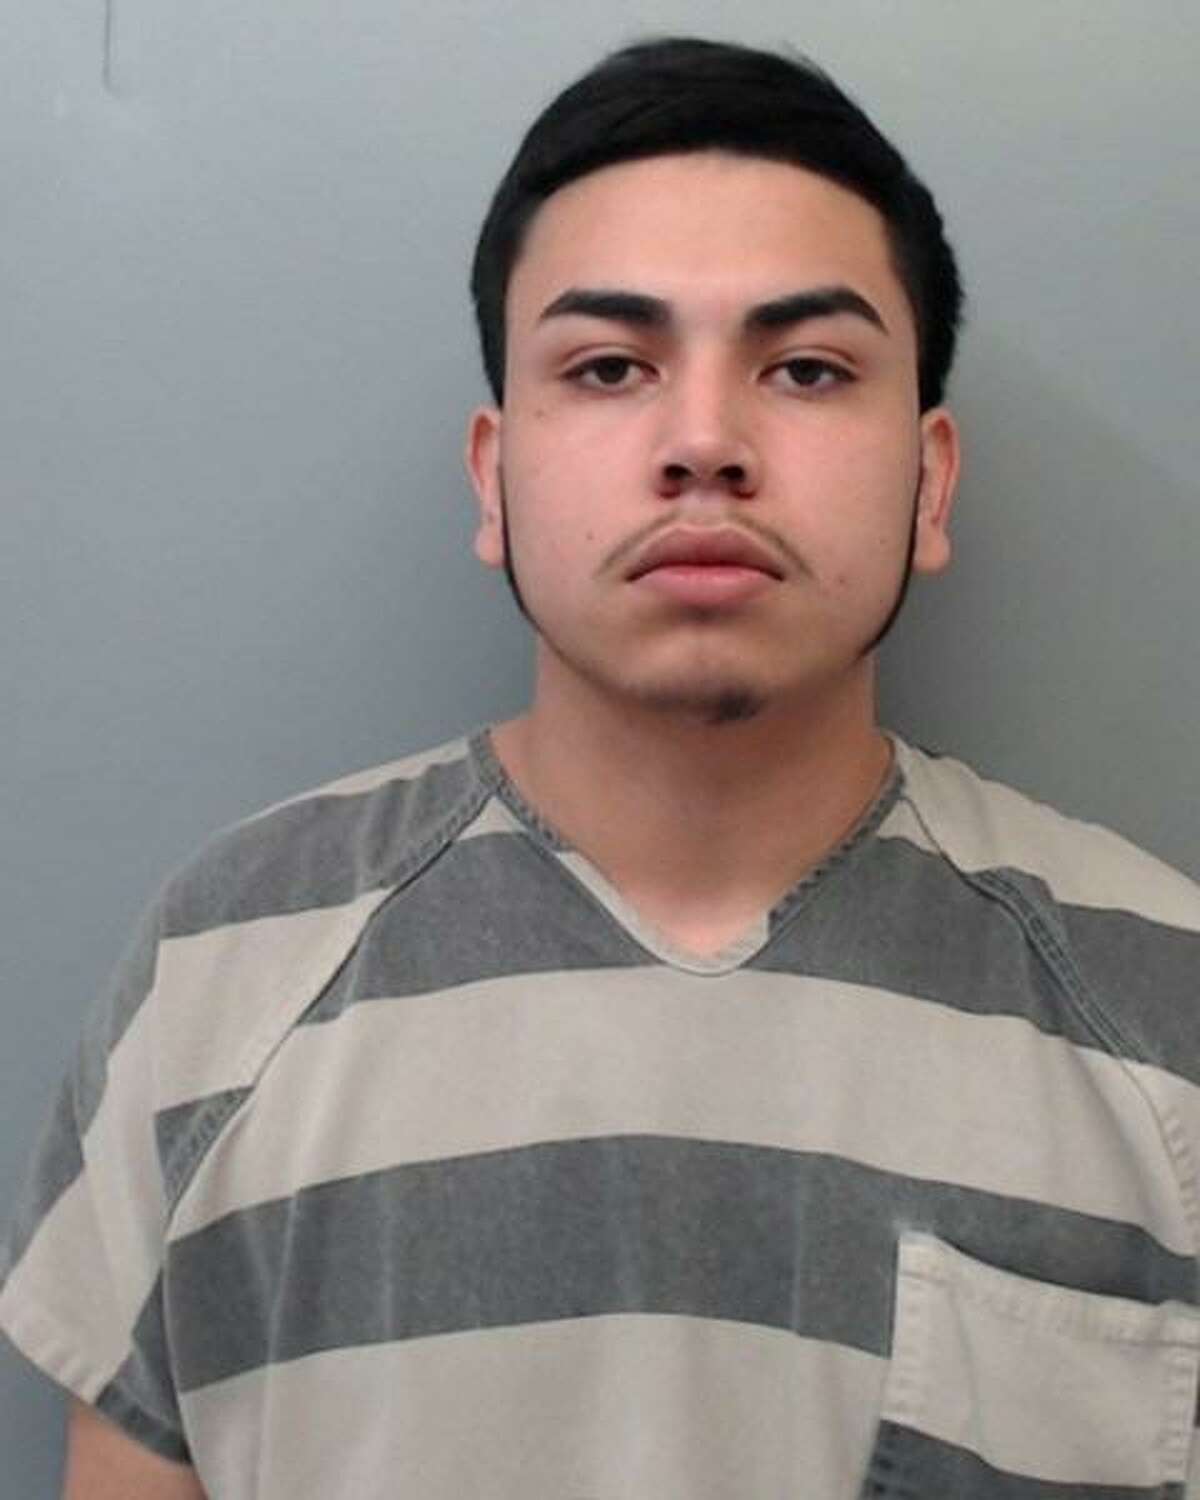 Maximiliano Vielma, 18, was charged with three counts of aggravated assault with a firearm.